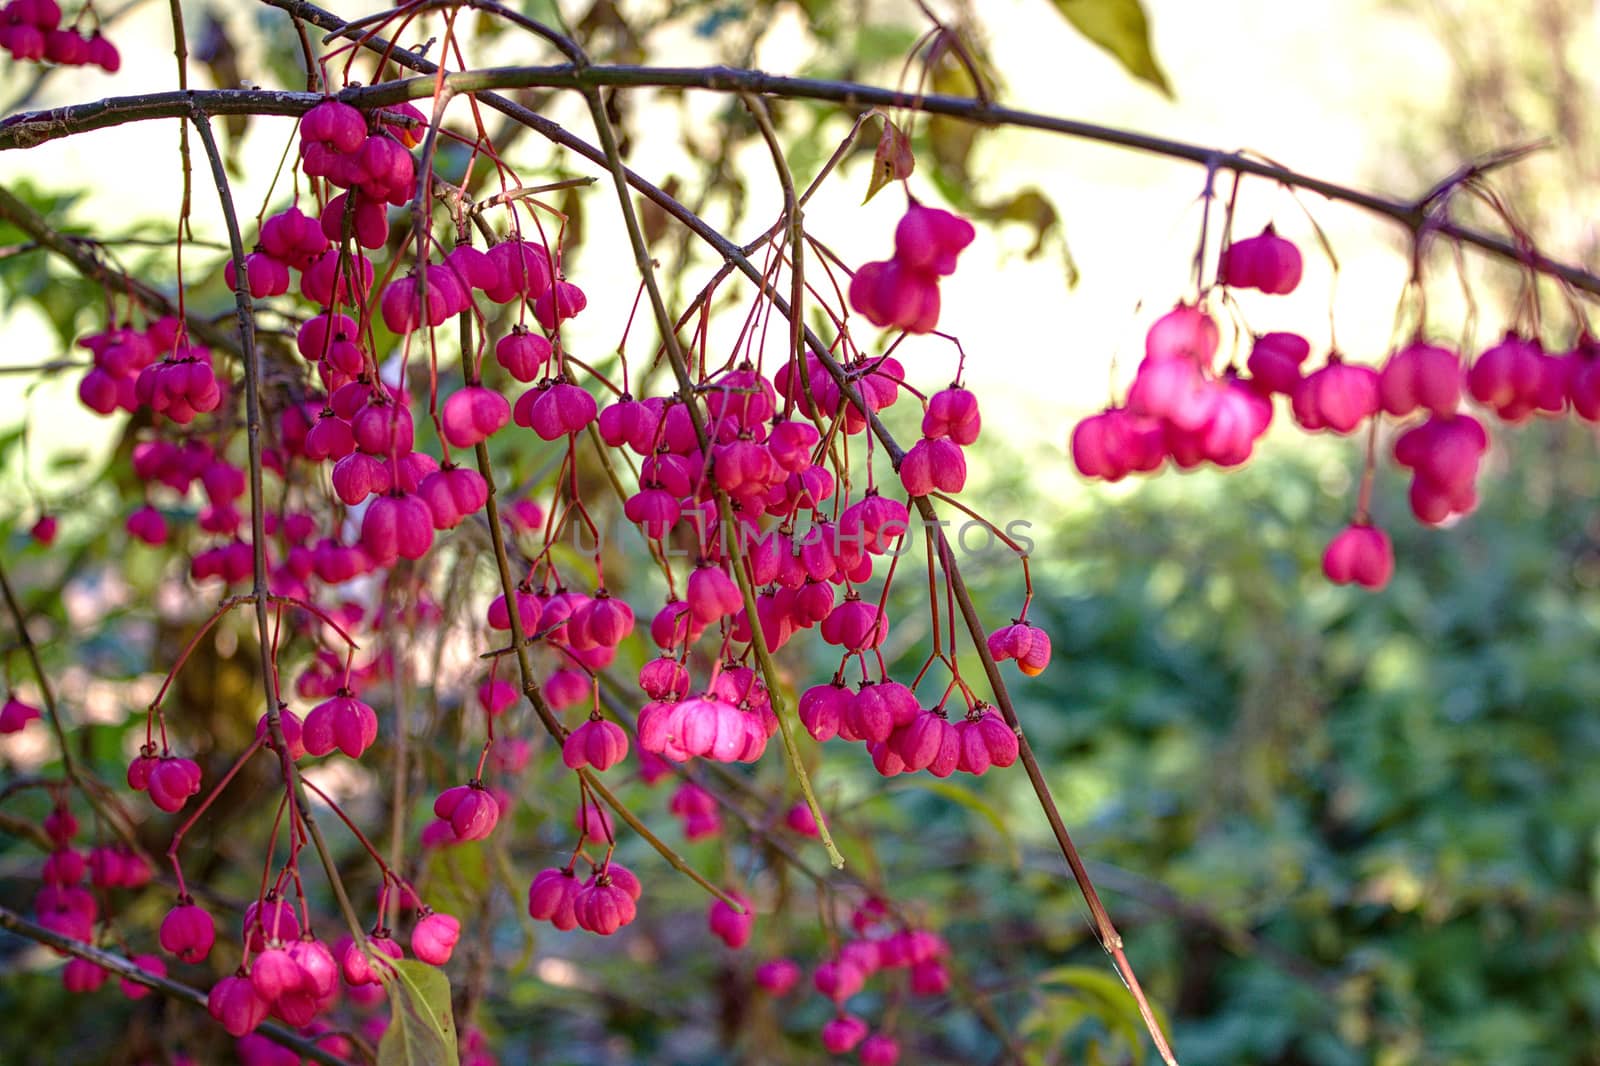 The picture shows a spindle tree in the autumn